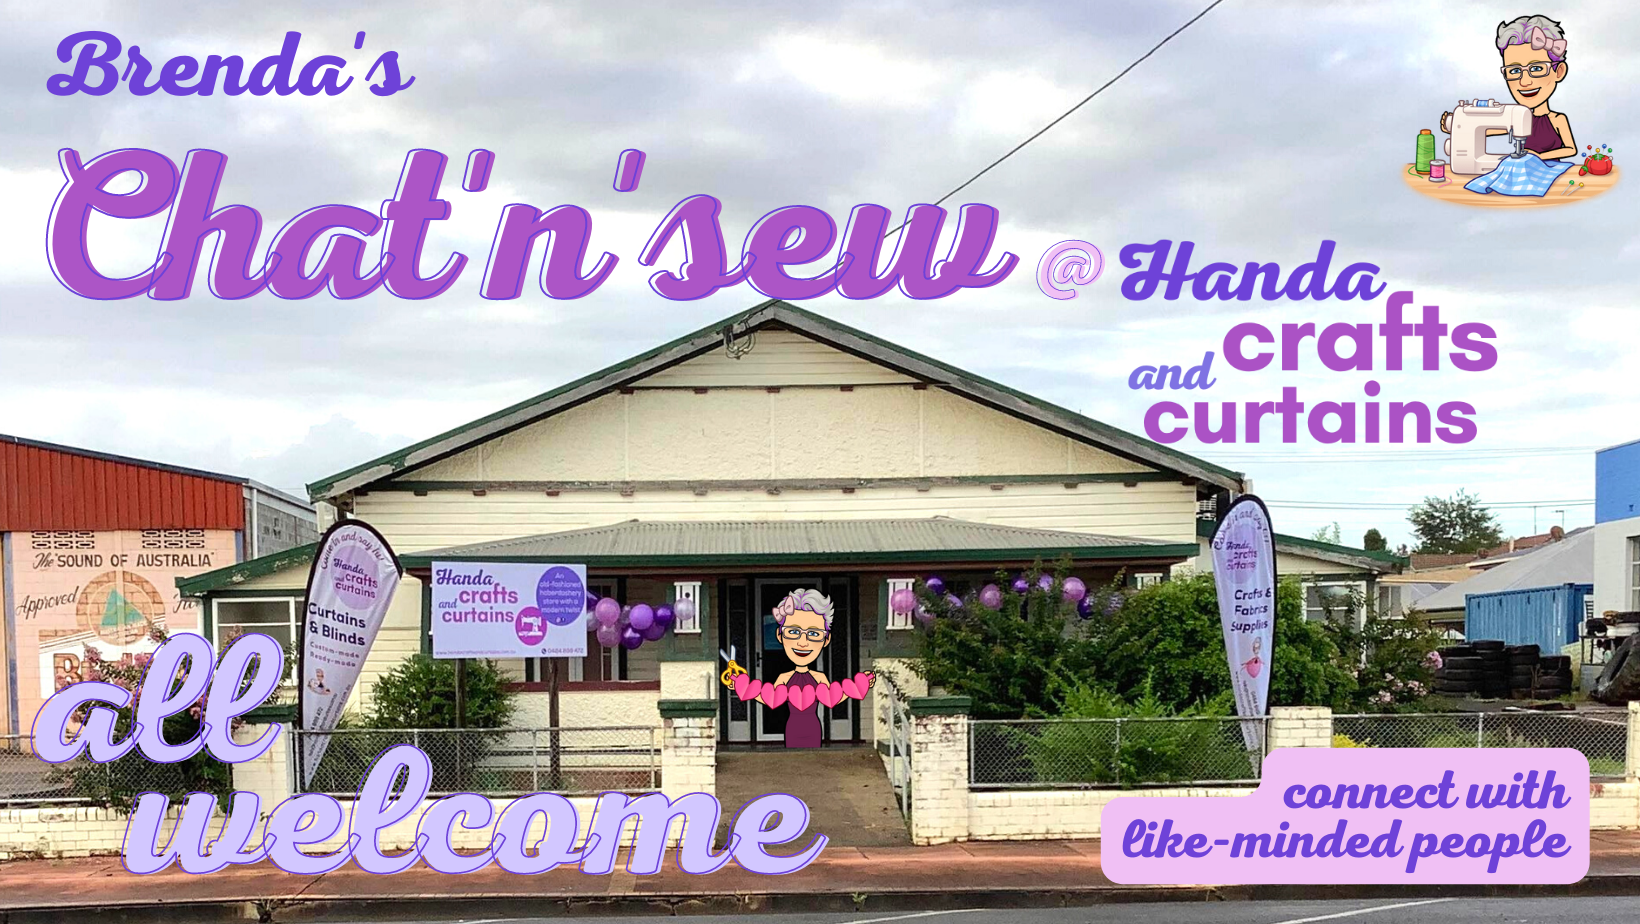 brenda's chat'n'sew at handa crafts and curtains casino nsw flood relief 